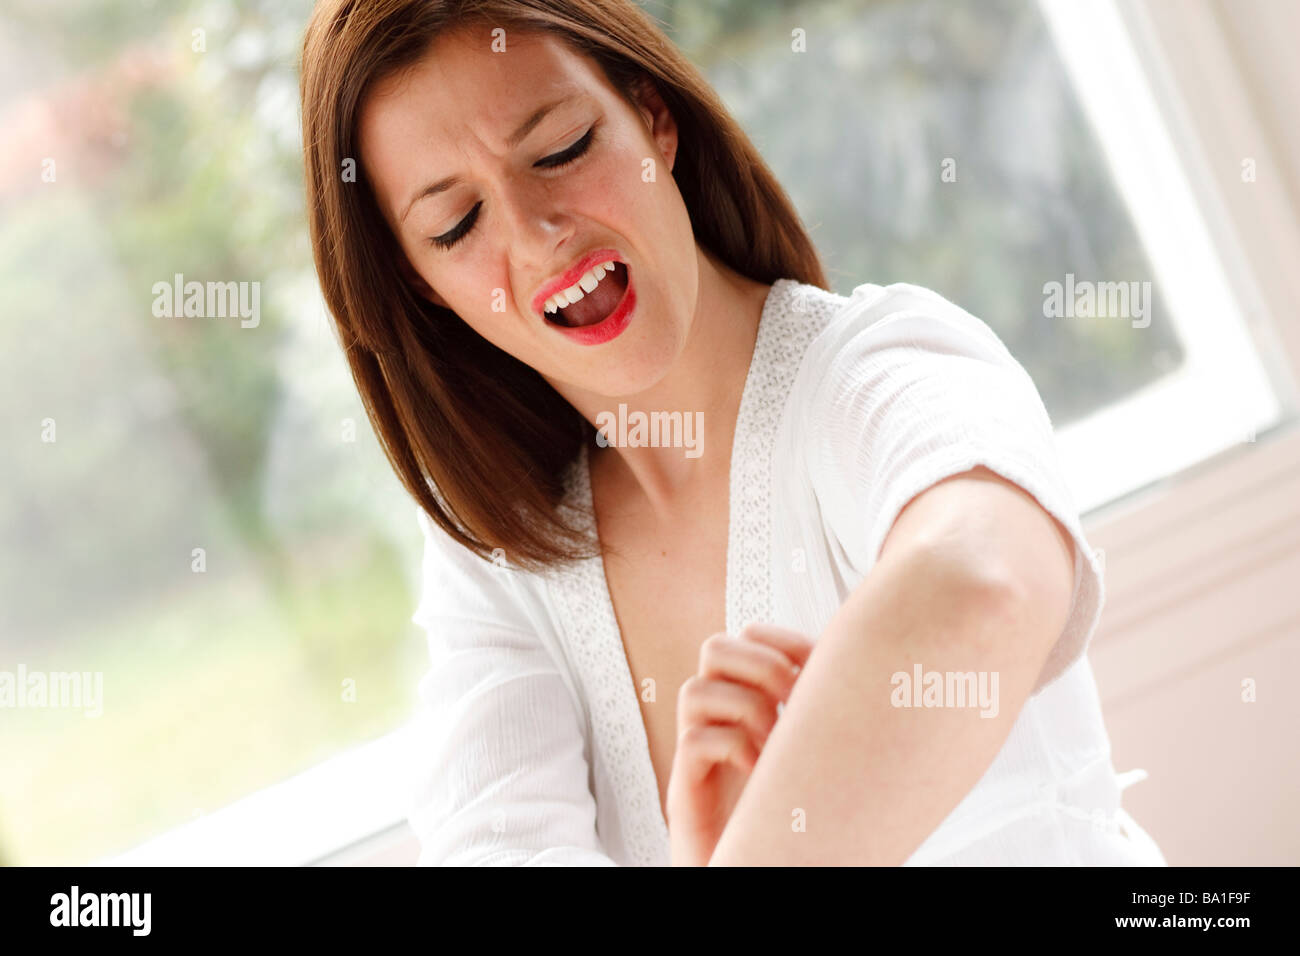 woman scratching her arm Stock Photo